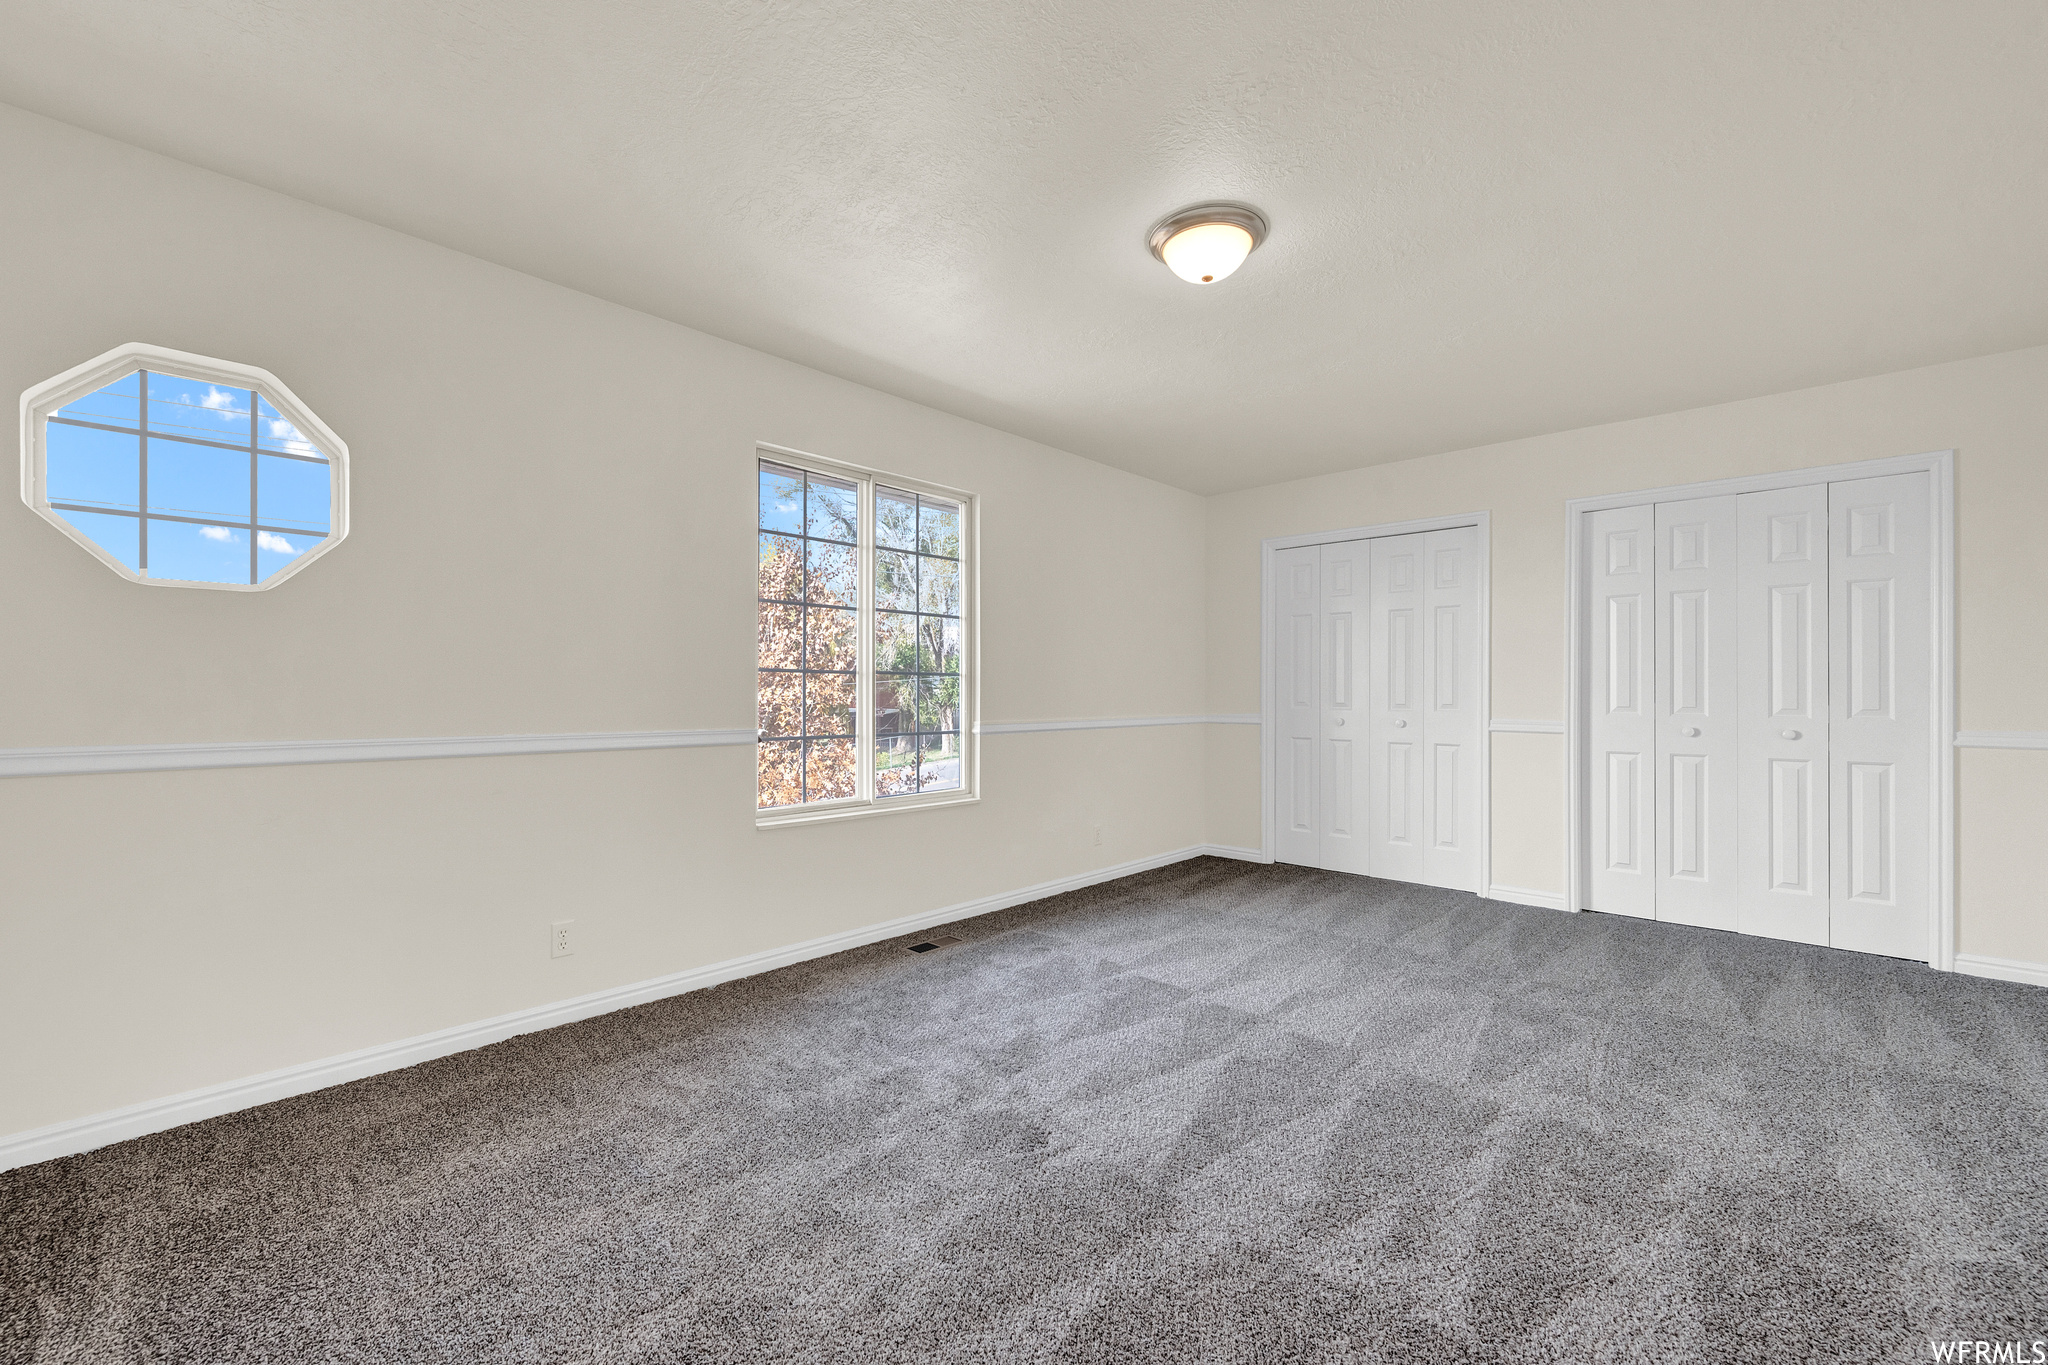 Bedroom #2 is large and has plenty of natural light and closet space - new carpet